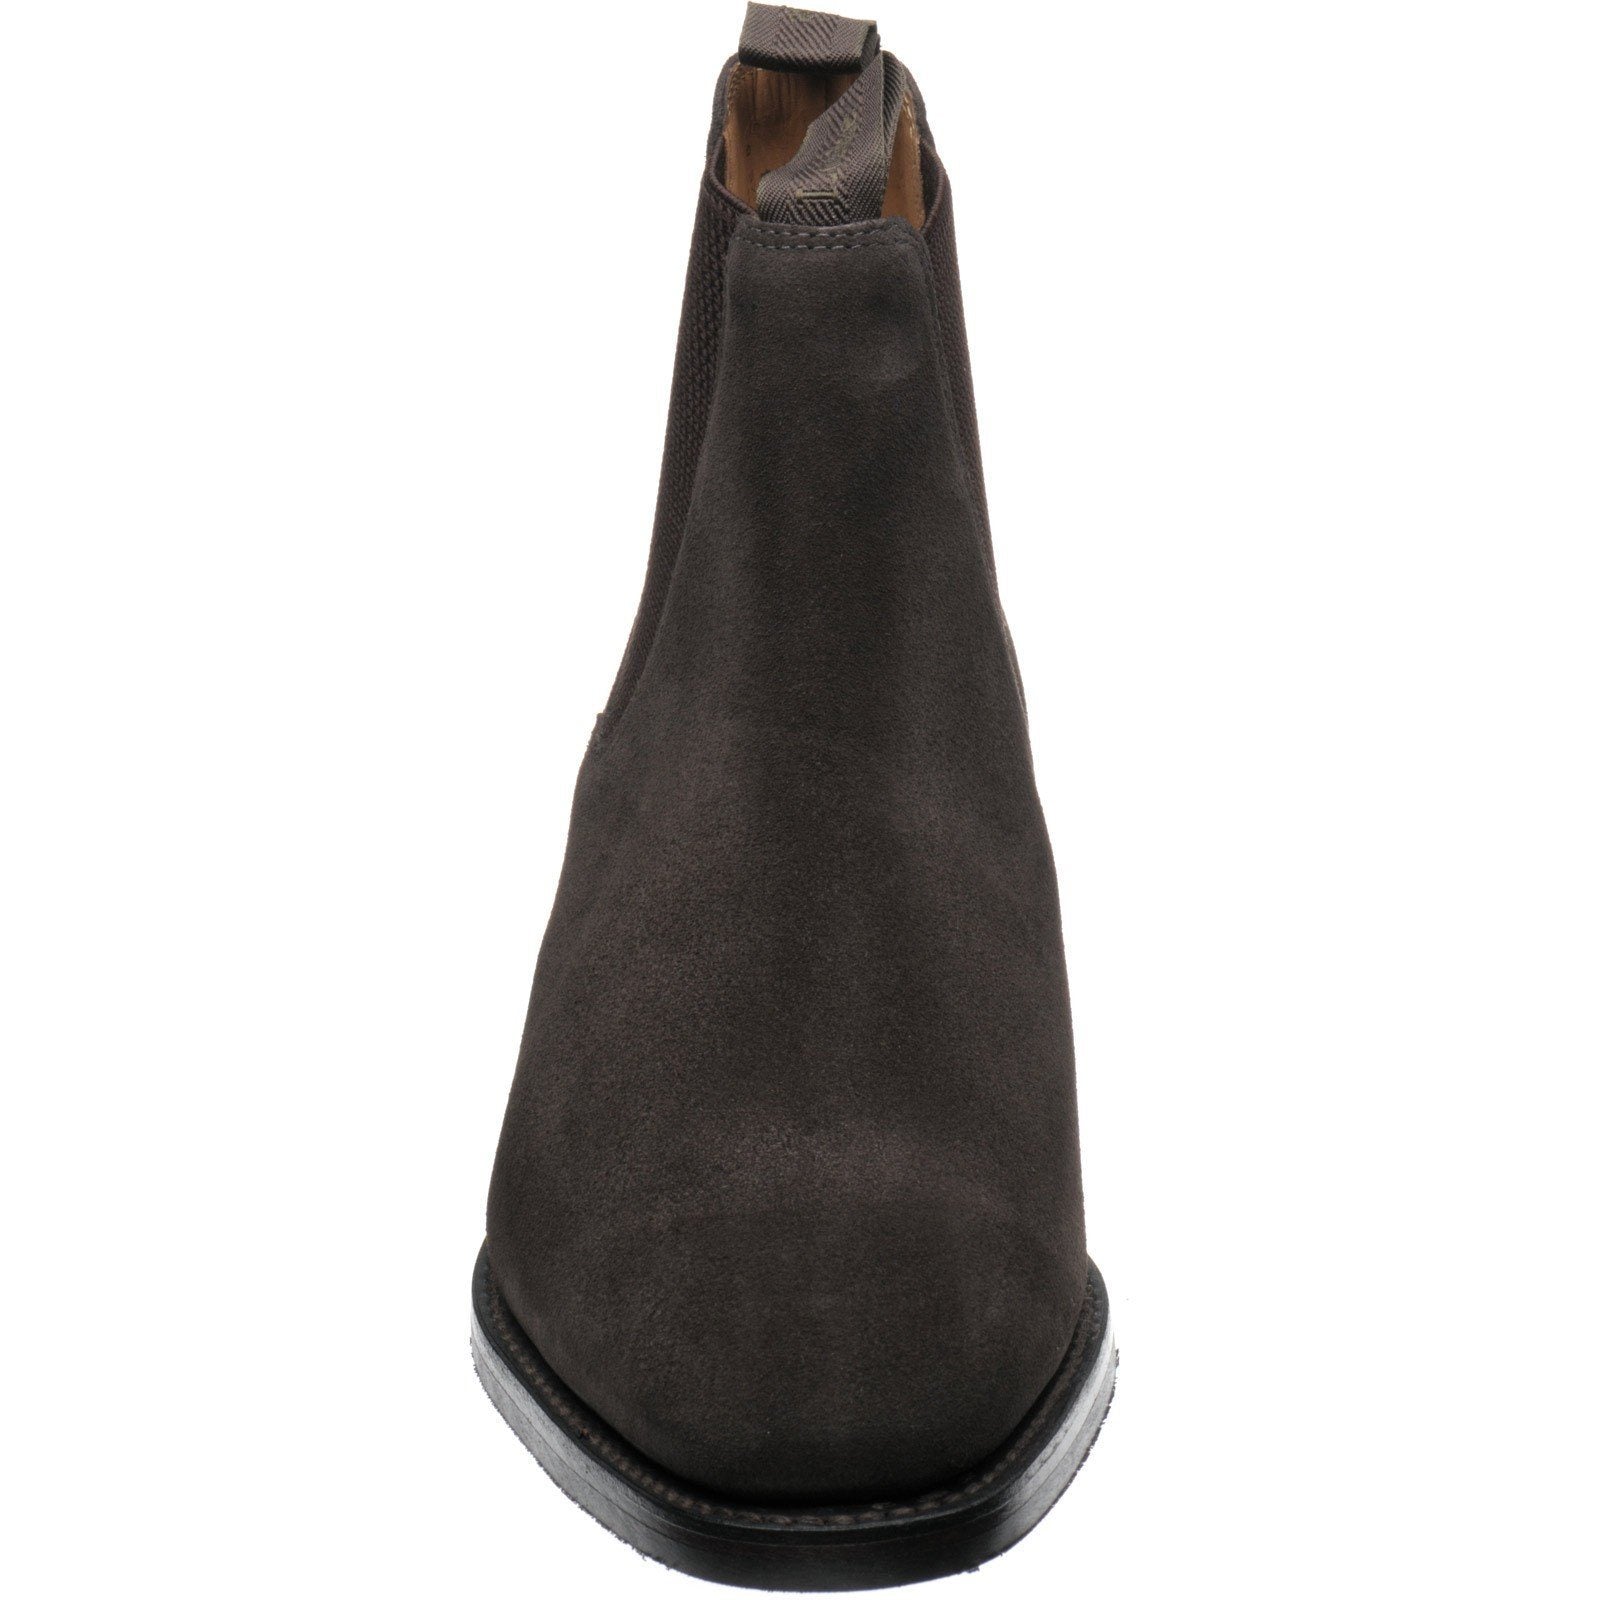 LOAKE Chatsworth Chelsea boot shoe - Dark Brown Suede - Angle View